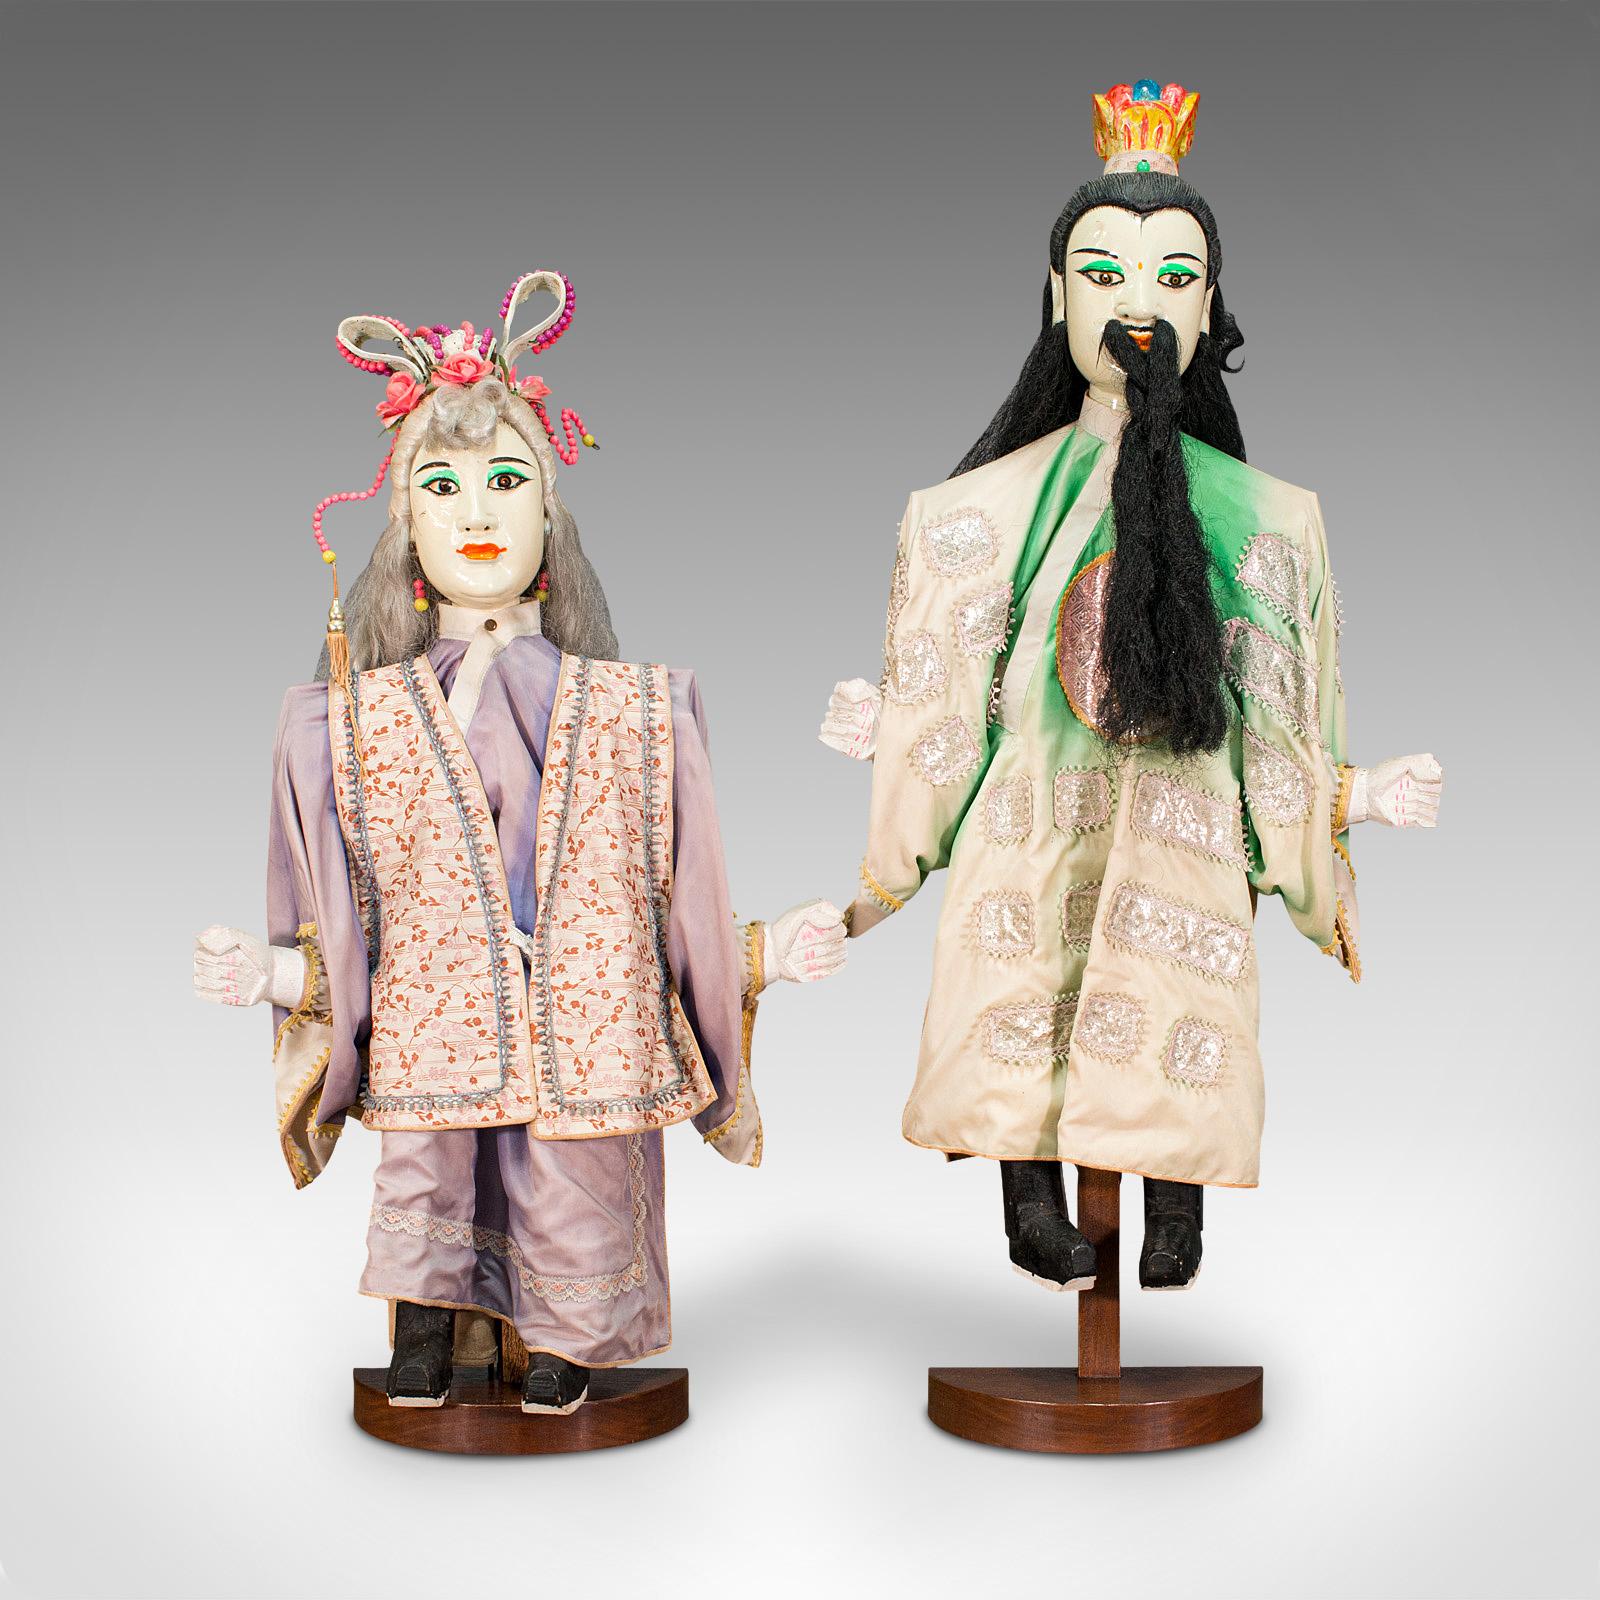 This is a large pair of vintage opera puppets. An Oriental, painted hardwood figure, dating to the mid 20th century, circa 1950.

Highly distinctive rod puppets presented for display
Displaying a desirable aged patina throughout
Painted hardwood